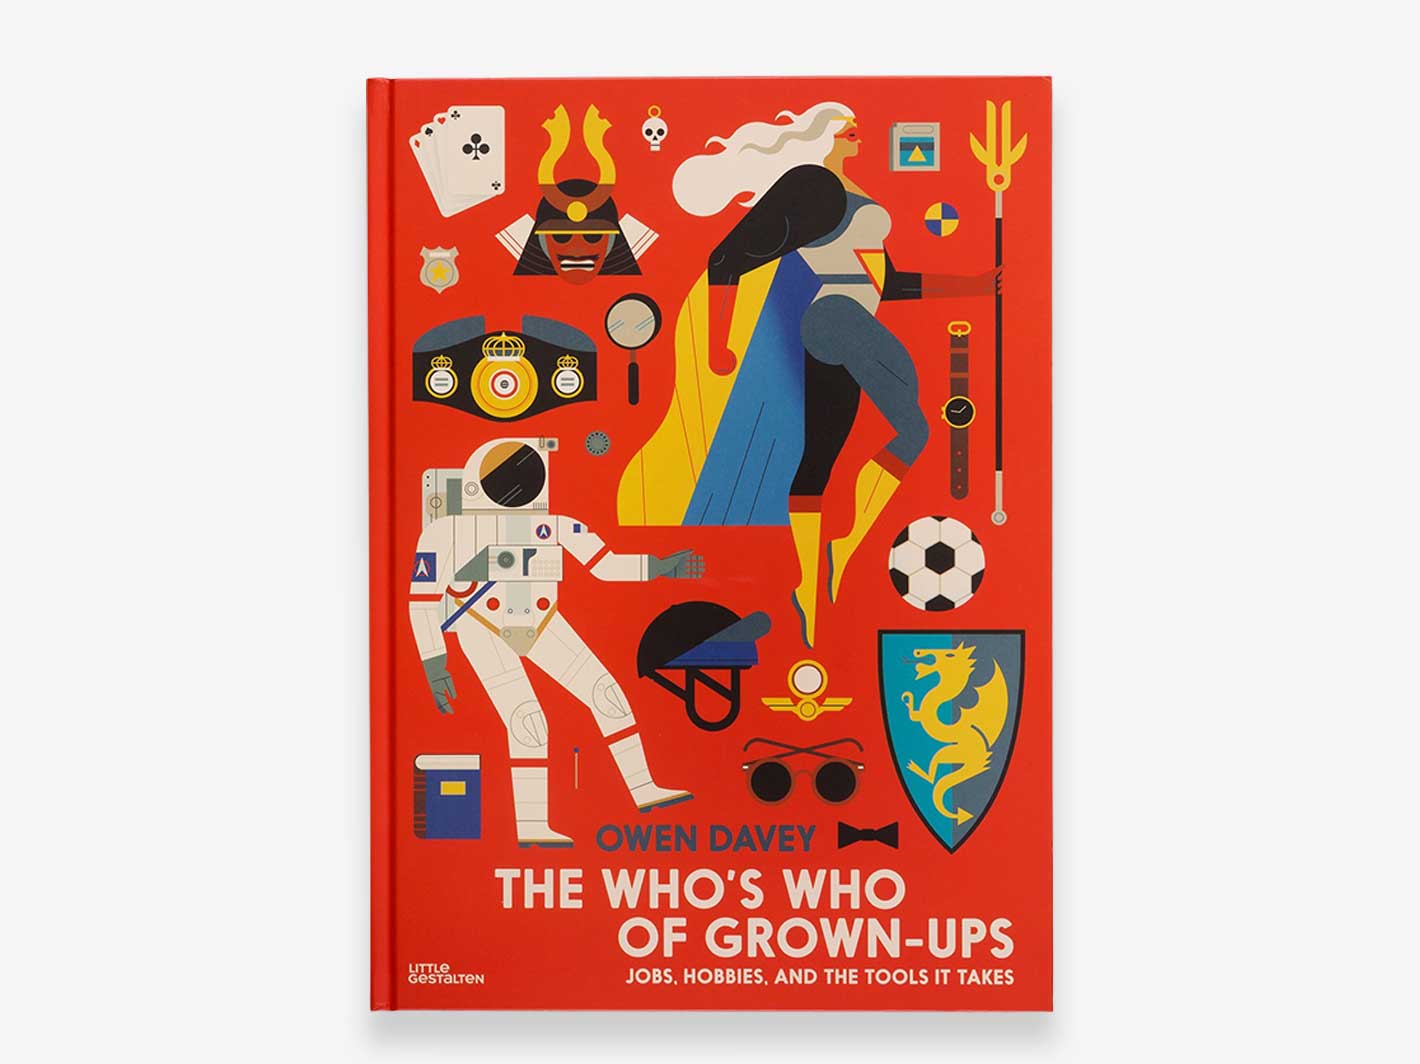 The Who's Who of Grown-Ups